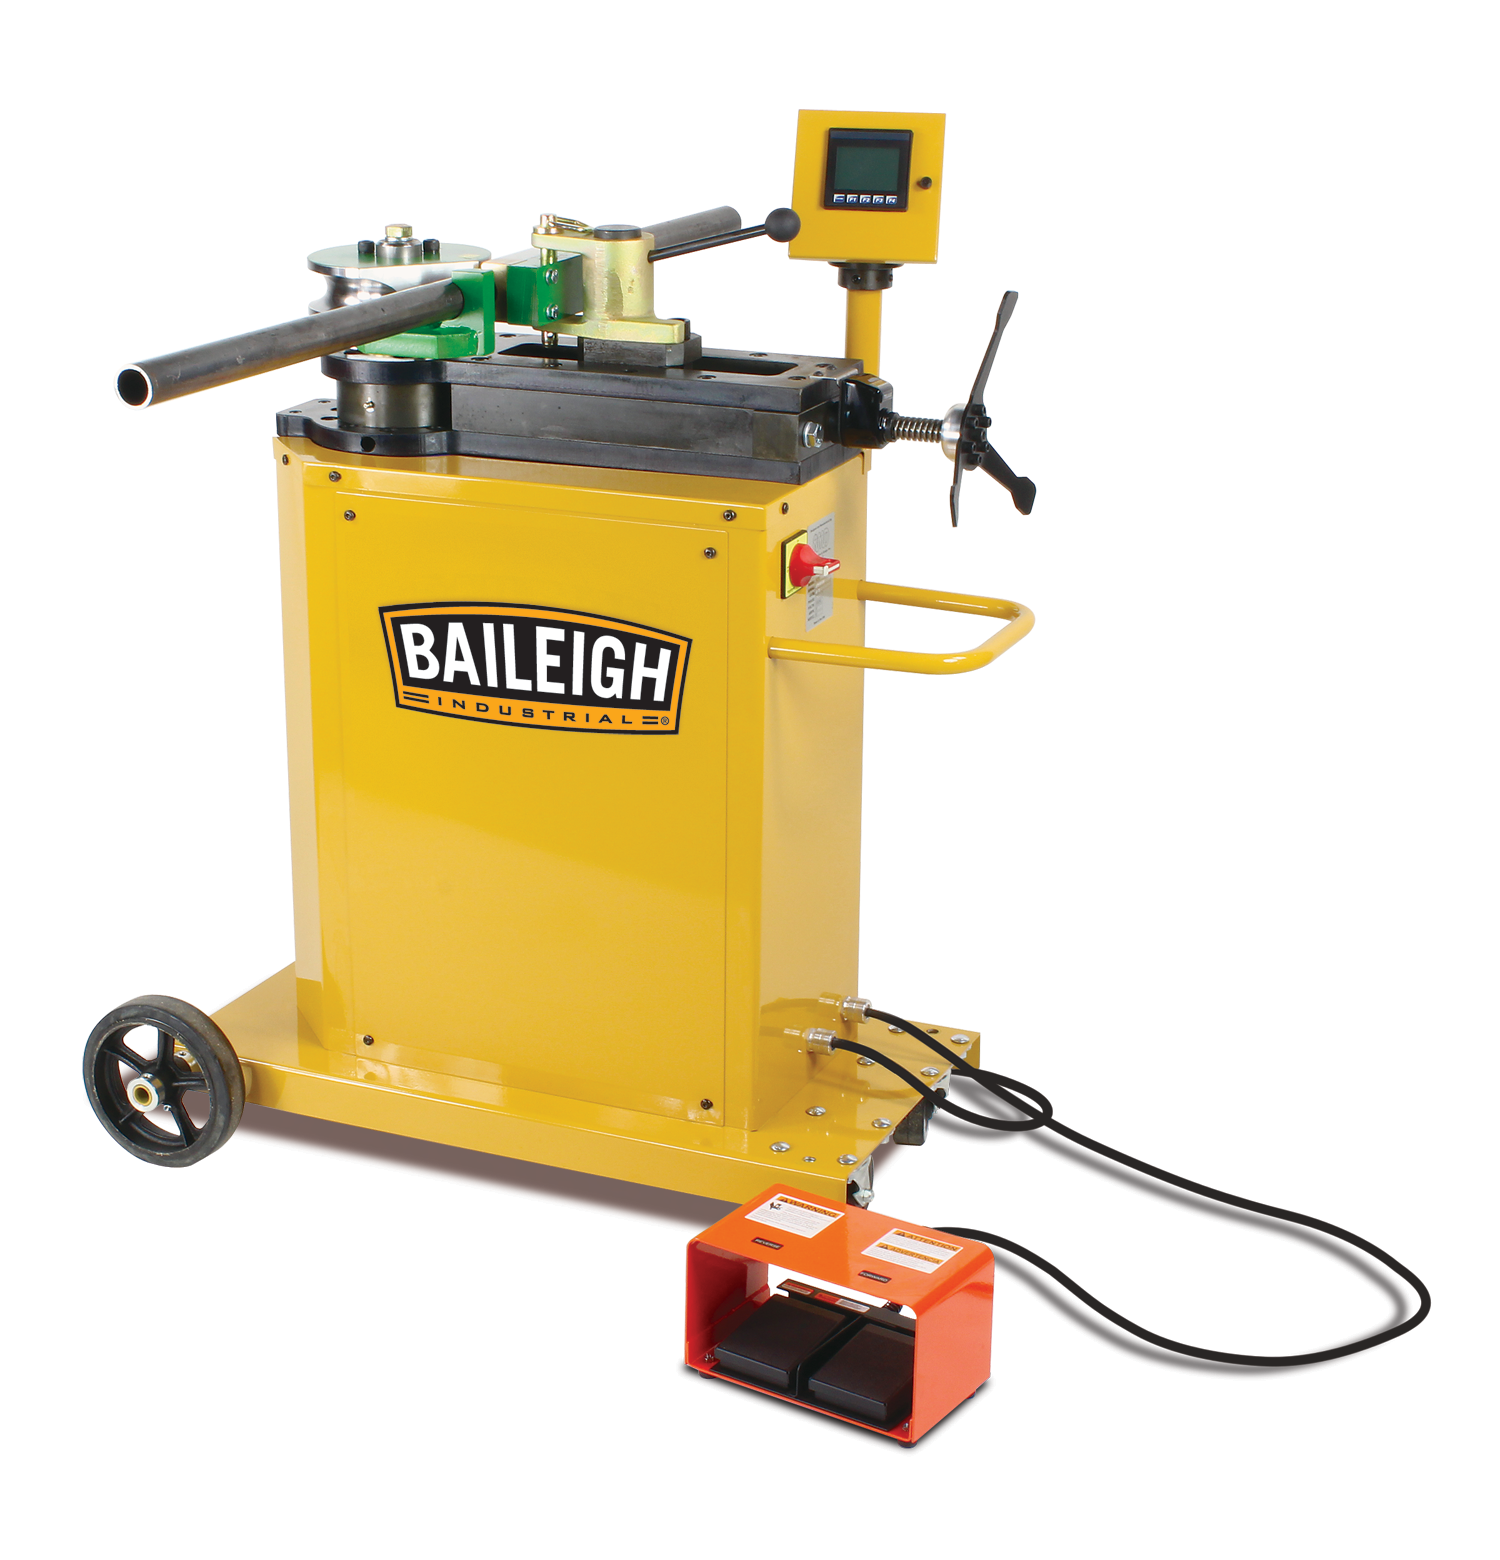 Baileigh RDB-250 220V 1 Phase Rotary Draw Bender w/ 170 Job Programmer, 2" Schedule 40 Pipe Capacity